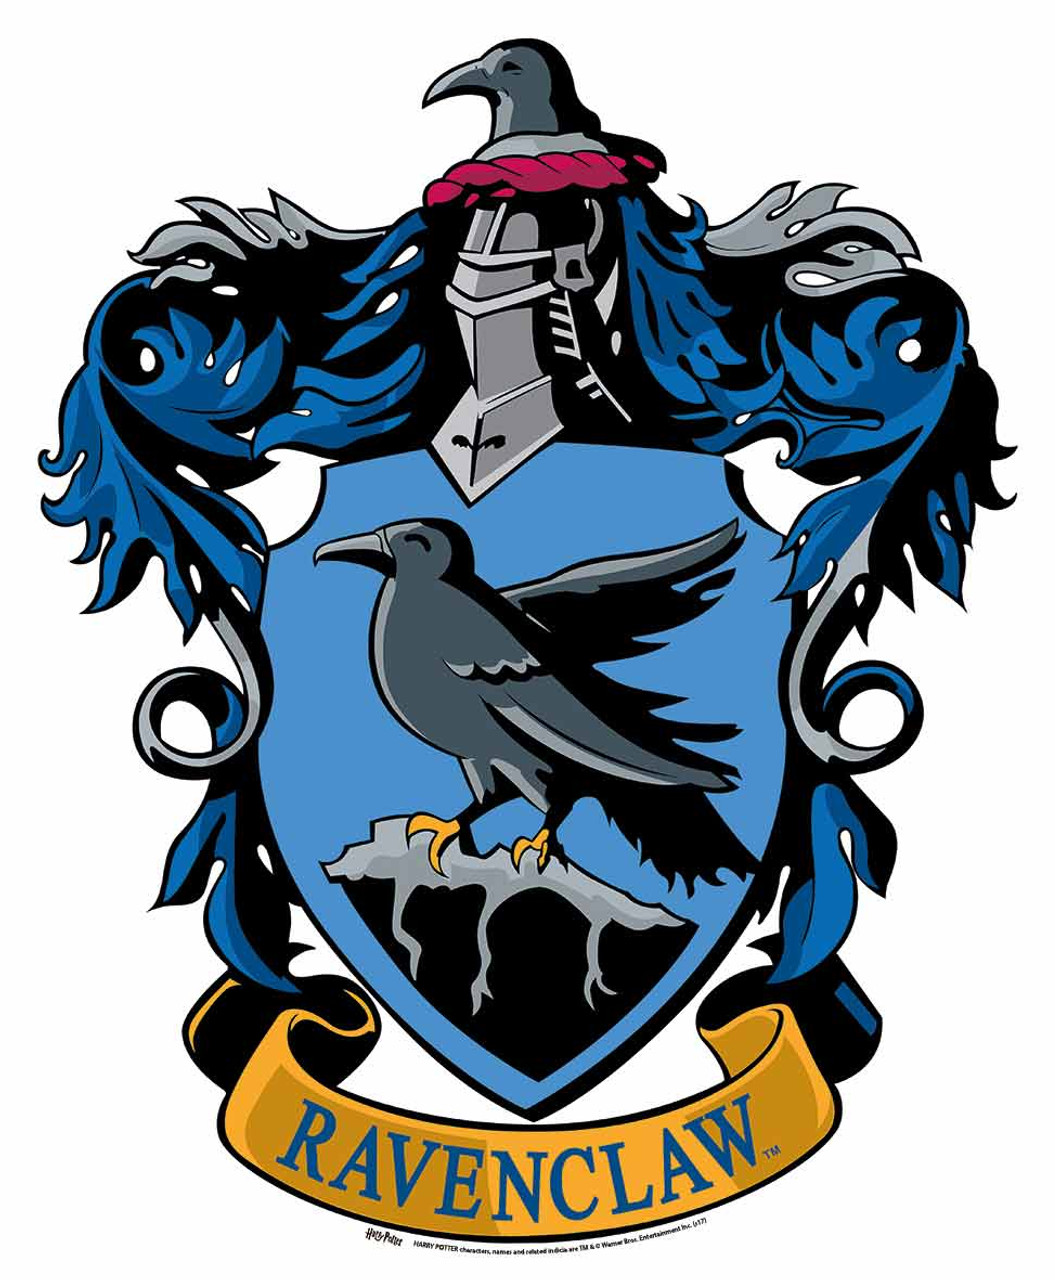 Harry-Potter-Ravenclaw-Crest-Official-wall-mounted-cardboard-cutout-buy-now-at-star__86173.1507640763.jpg